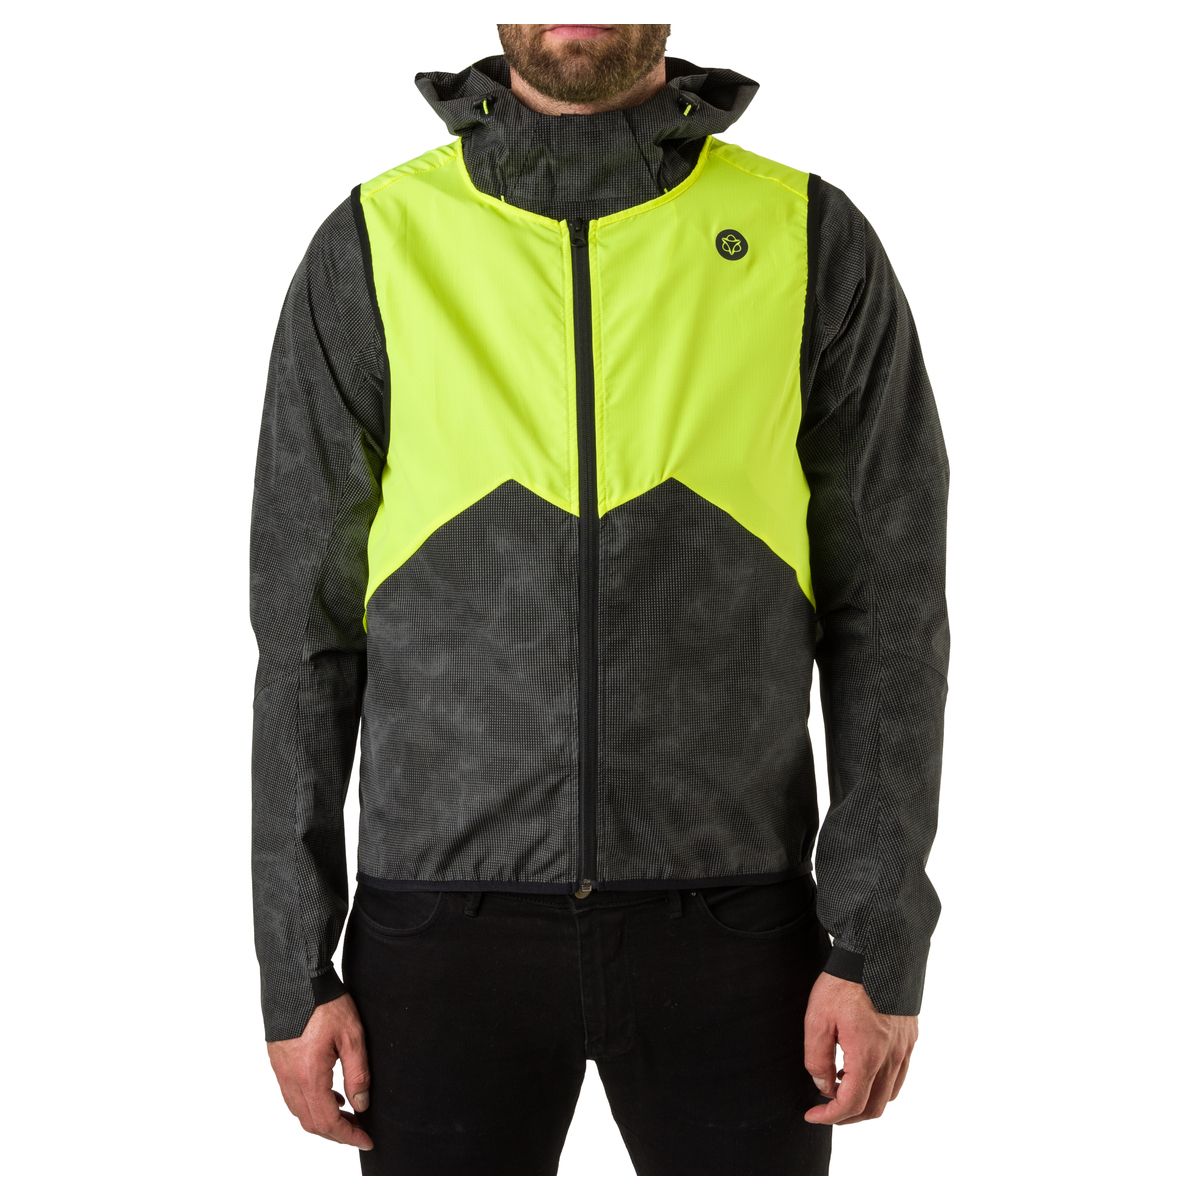 Compact Chaleco Commuter Hi-vis & Reflection fit example